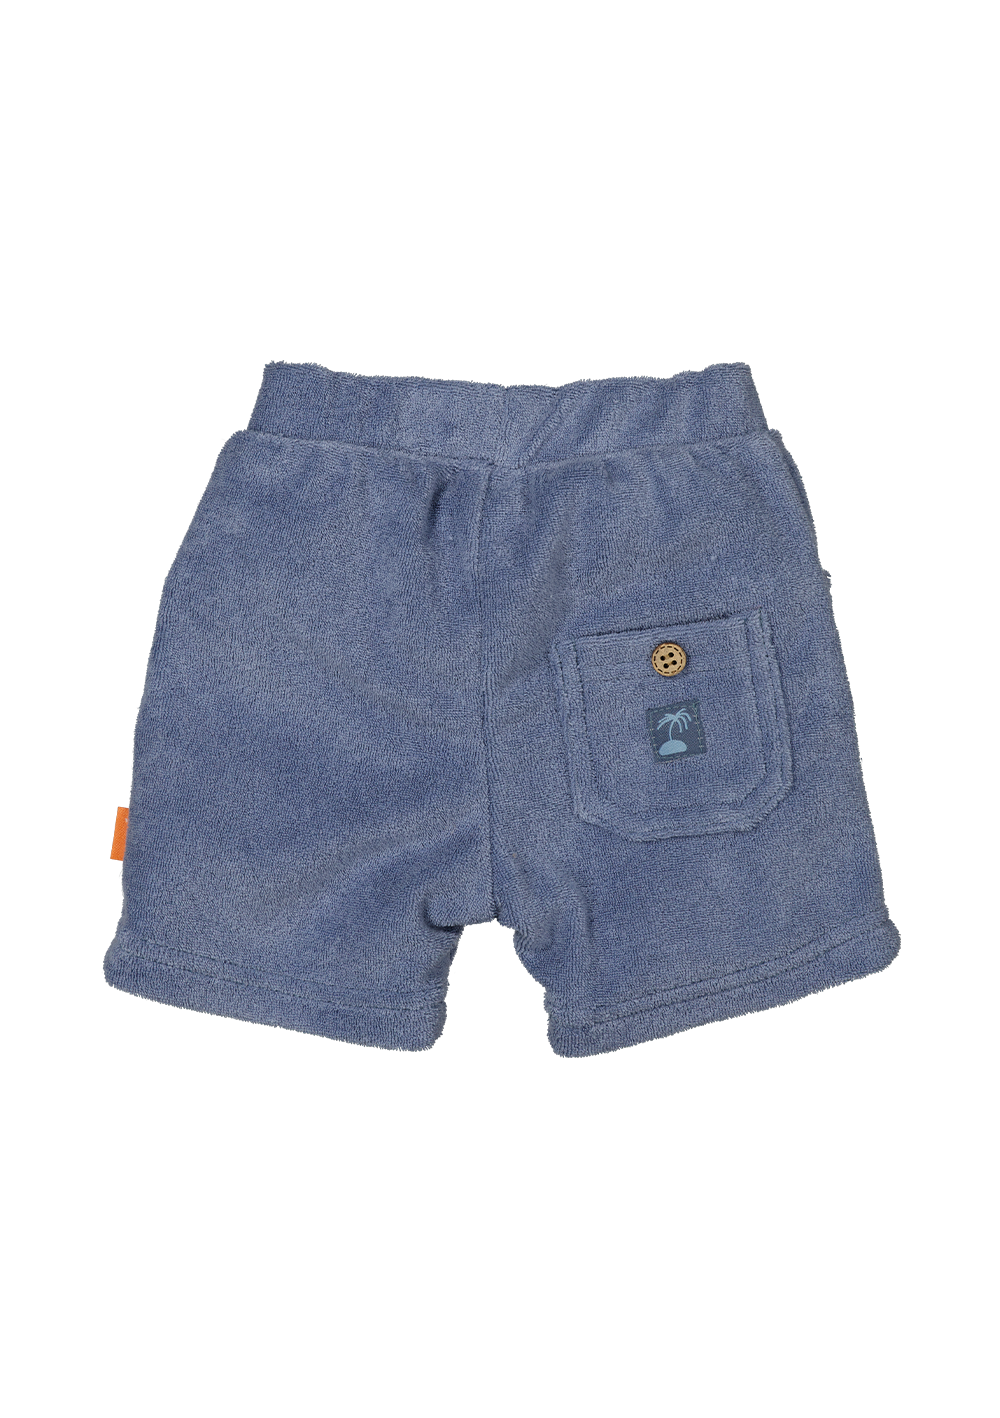 BESS S24 l2 Shorts Towelling Country Blue 241087-074